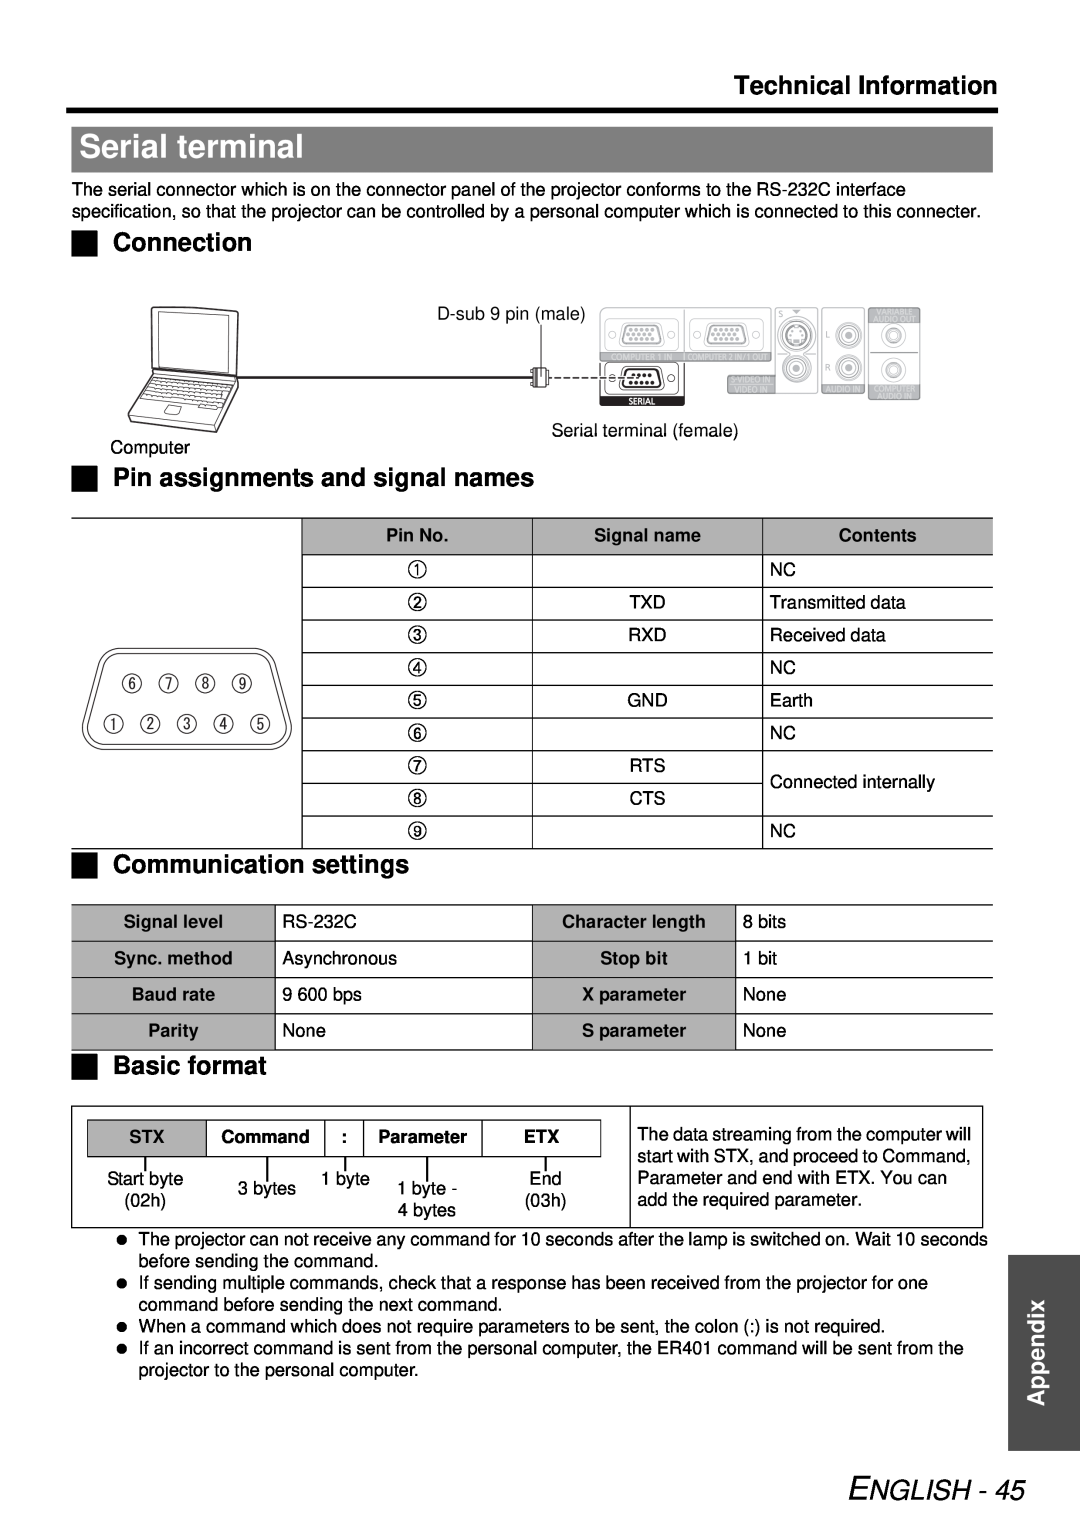 Panasonic PT-LB78U Serial terminal, Technical Information, Connection, Pin assignments and signal names, Basic format 